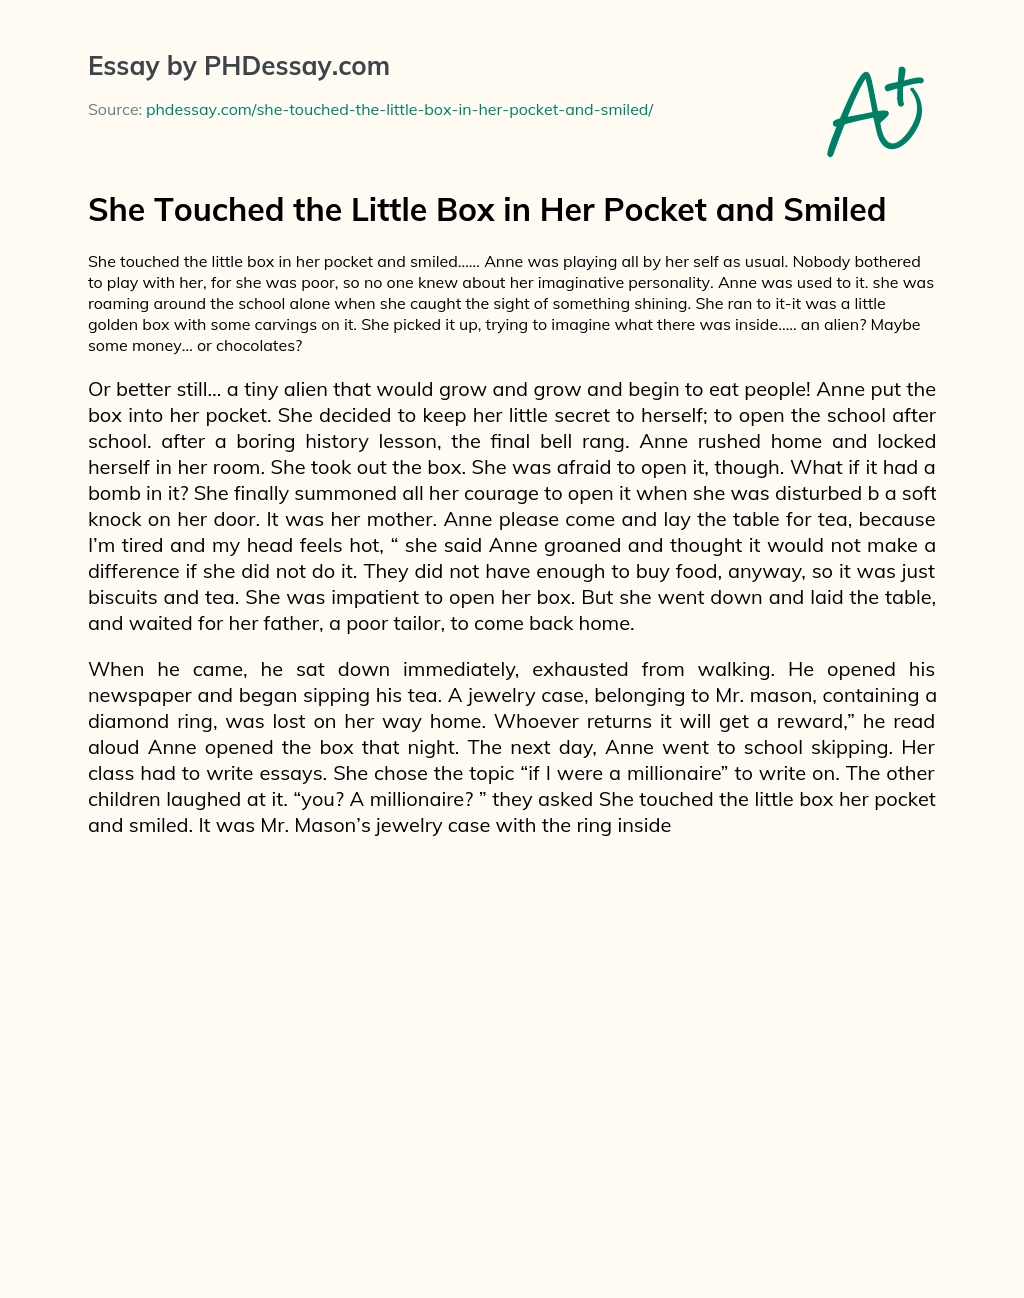 She Touched the Little Box in Her Pocket and Smiled essay